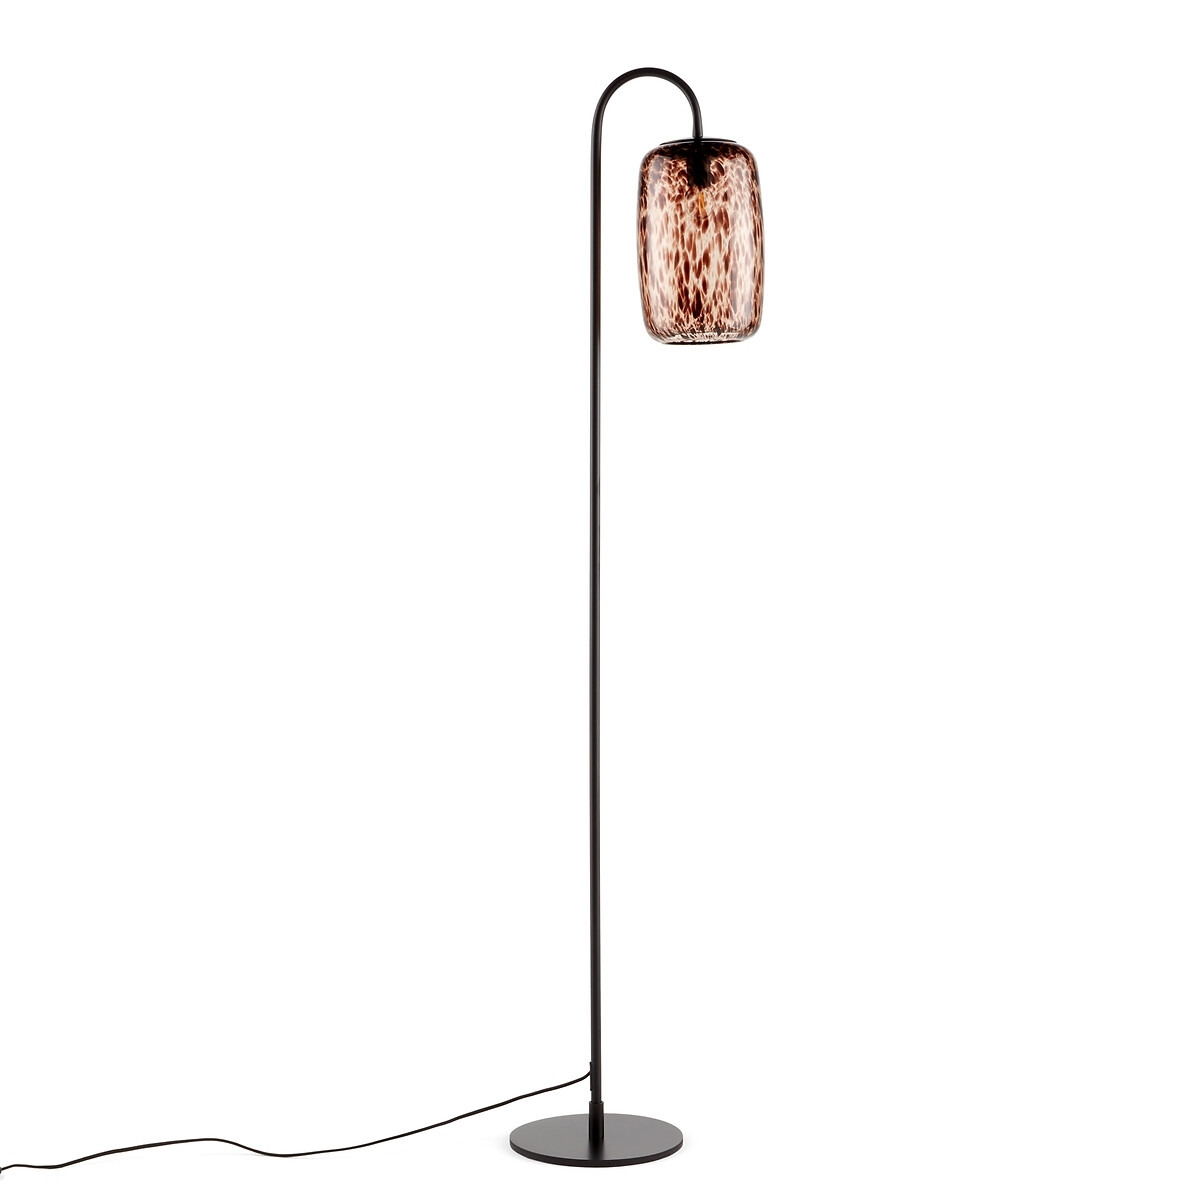 Toleco Metal and Amber Glass Floor Lamp - image 1